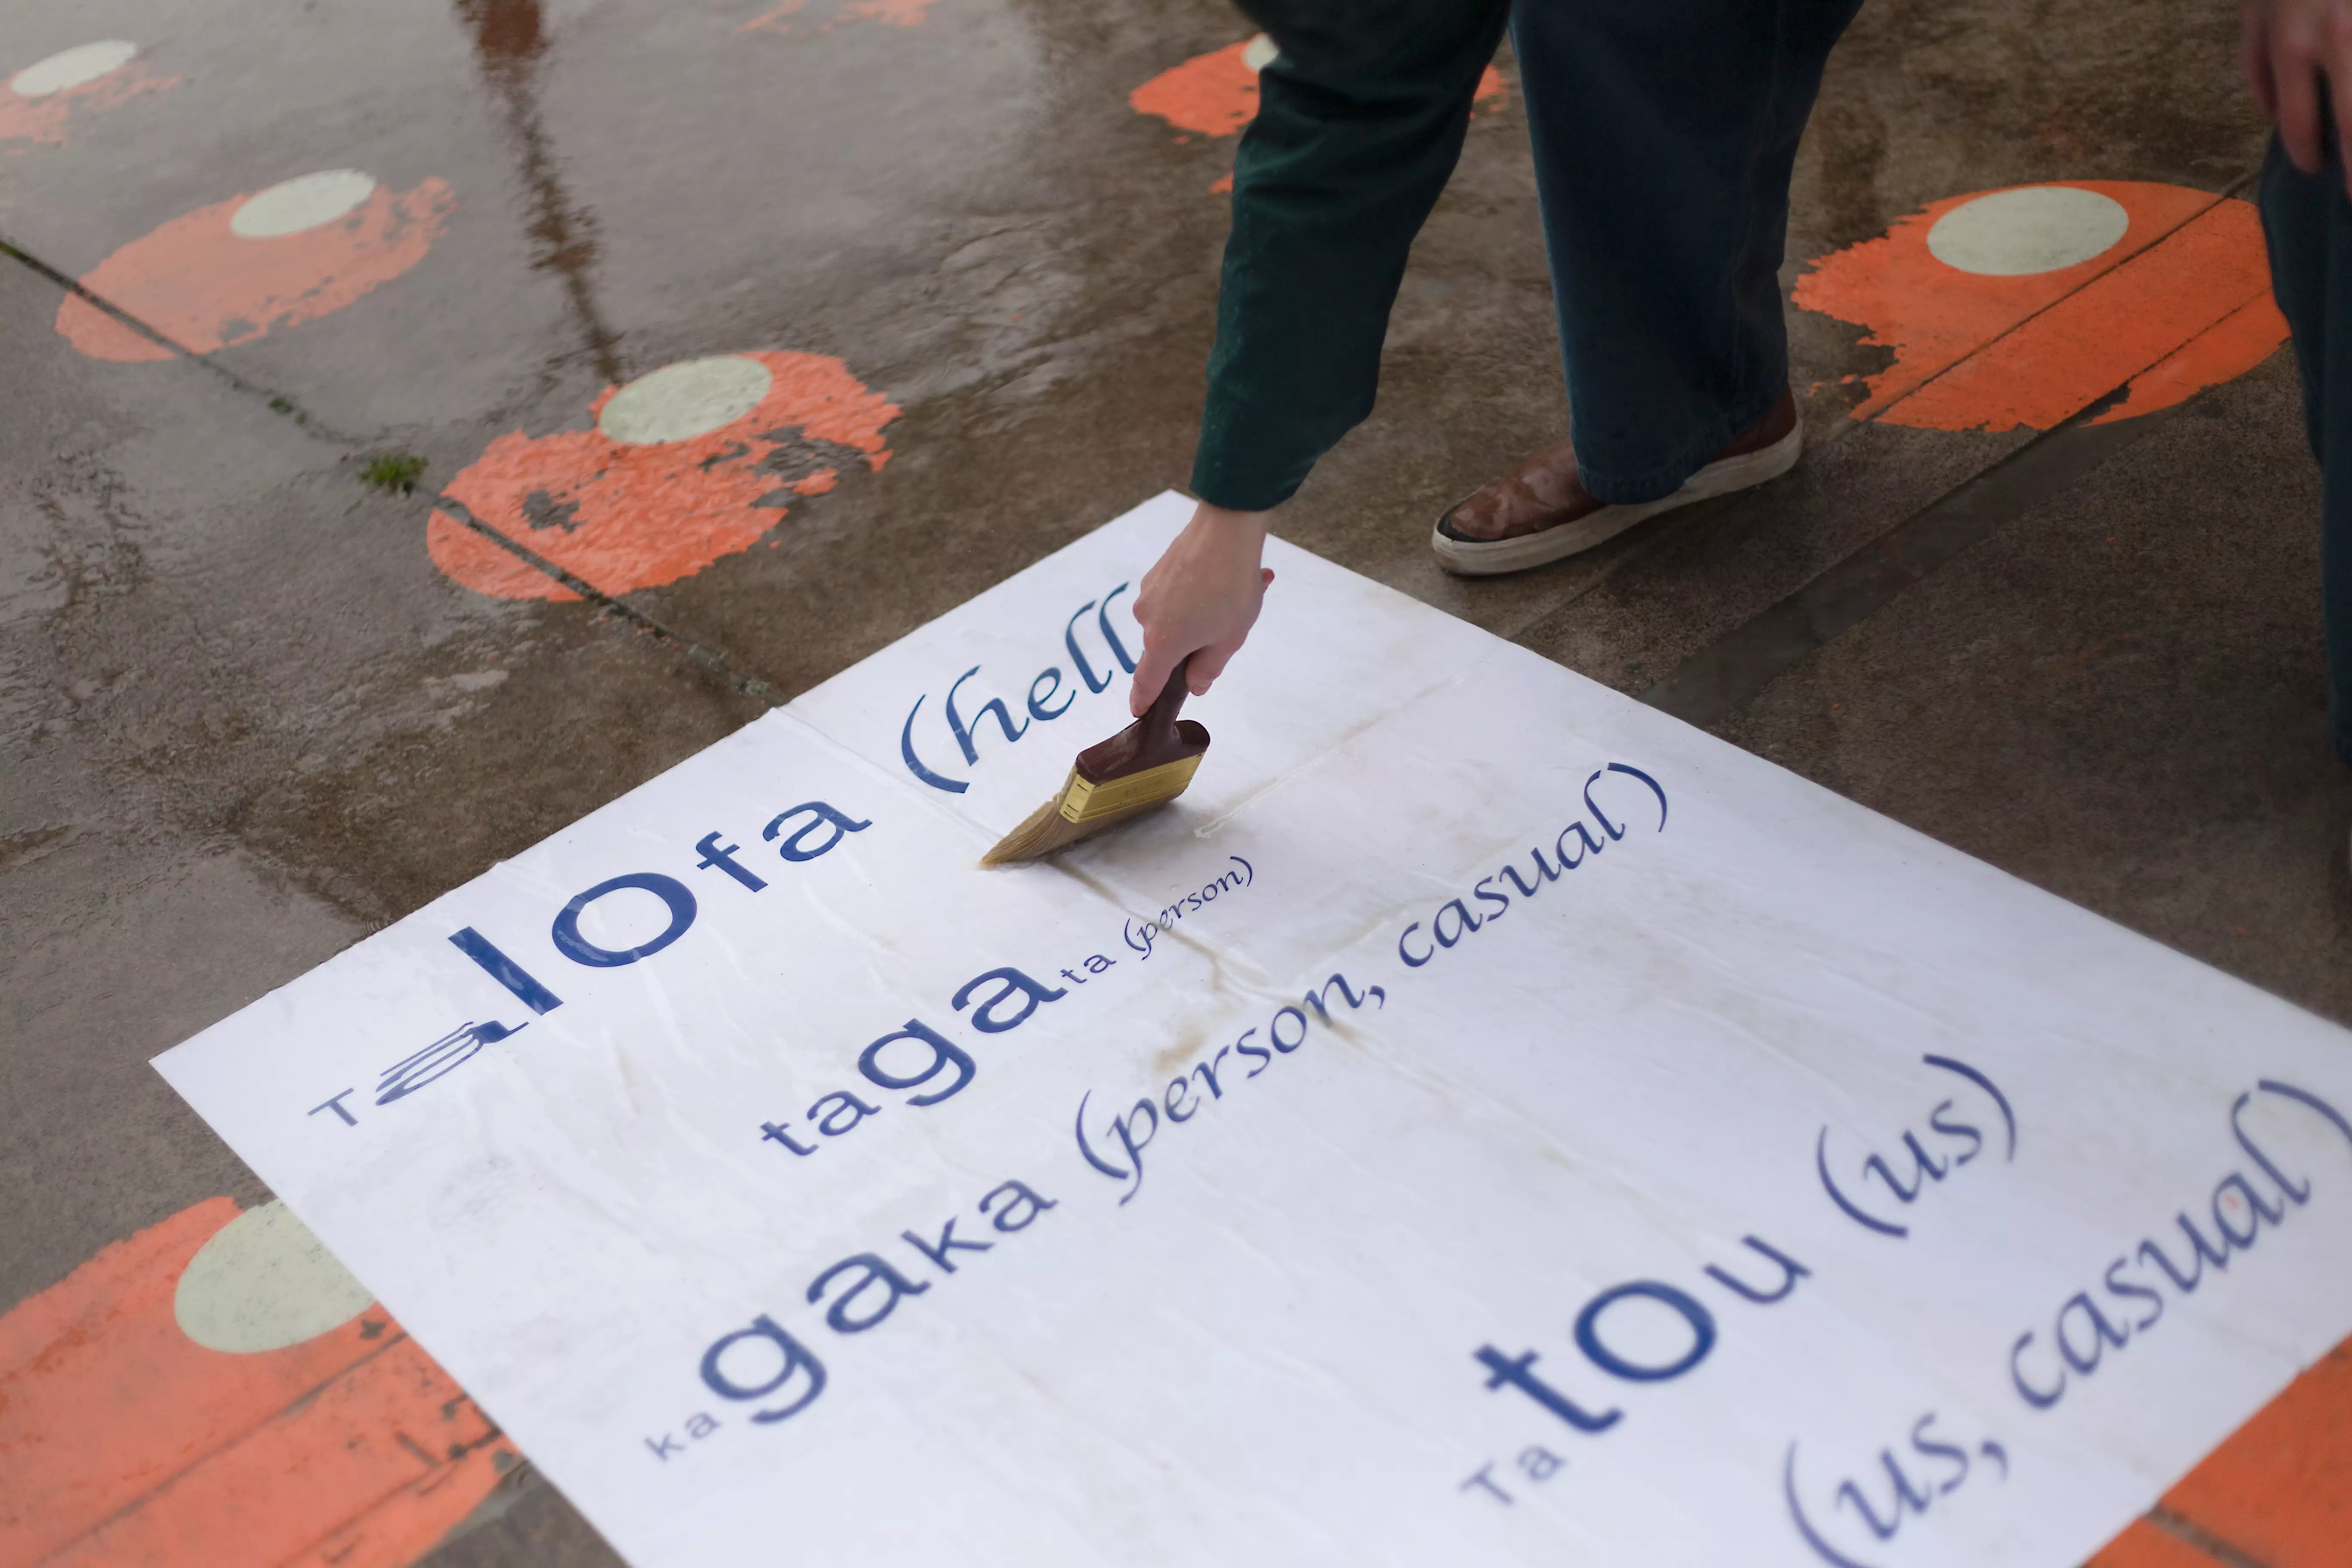 A poster being installed on the ground depicting Samoan pronunciation concrete poetry.